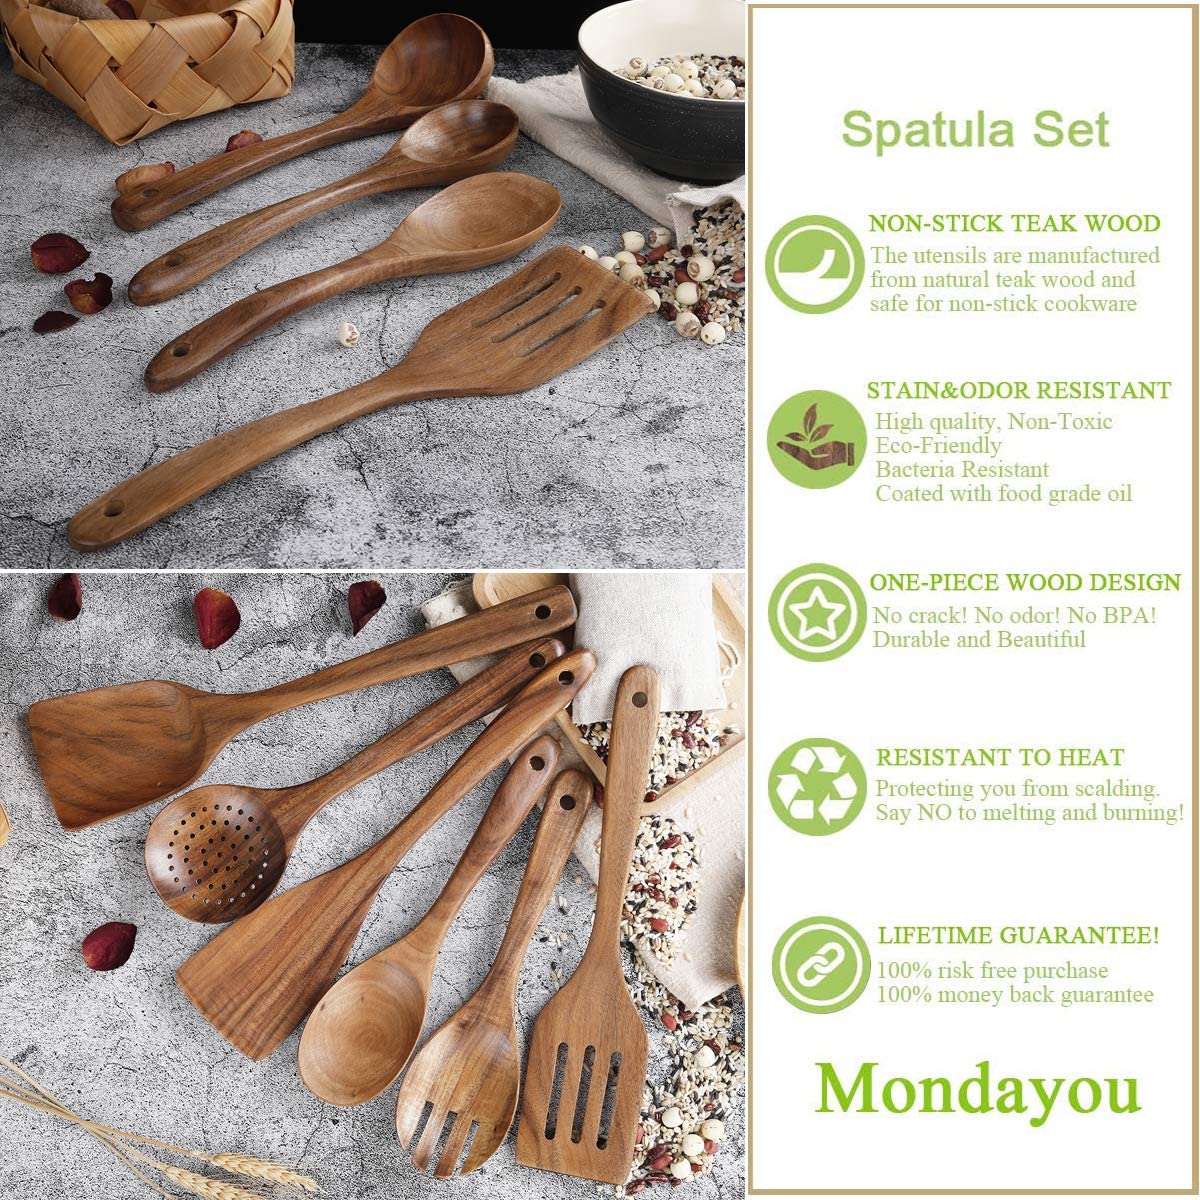 Best wooden kitchen utensils for cooking, serving and eating - Sew